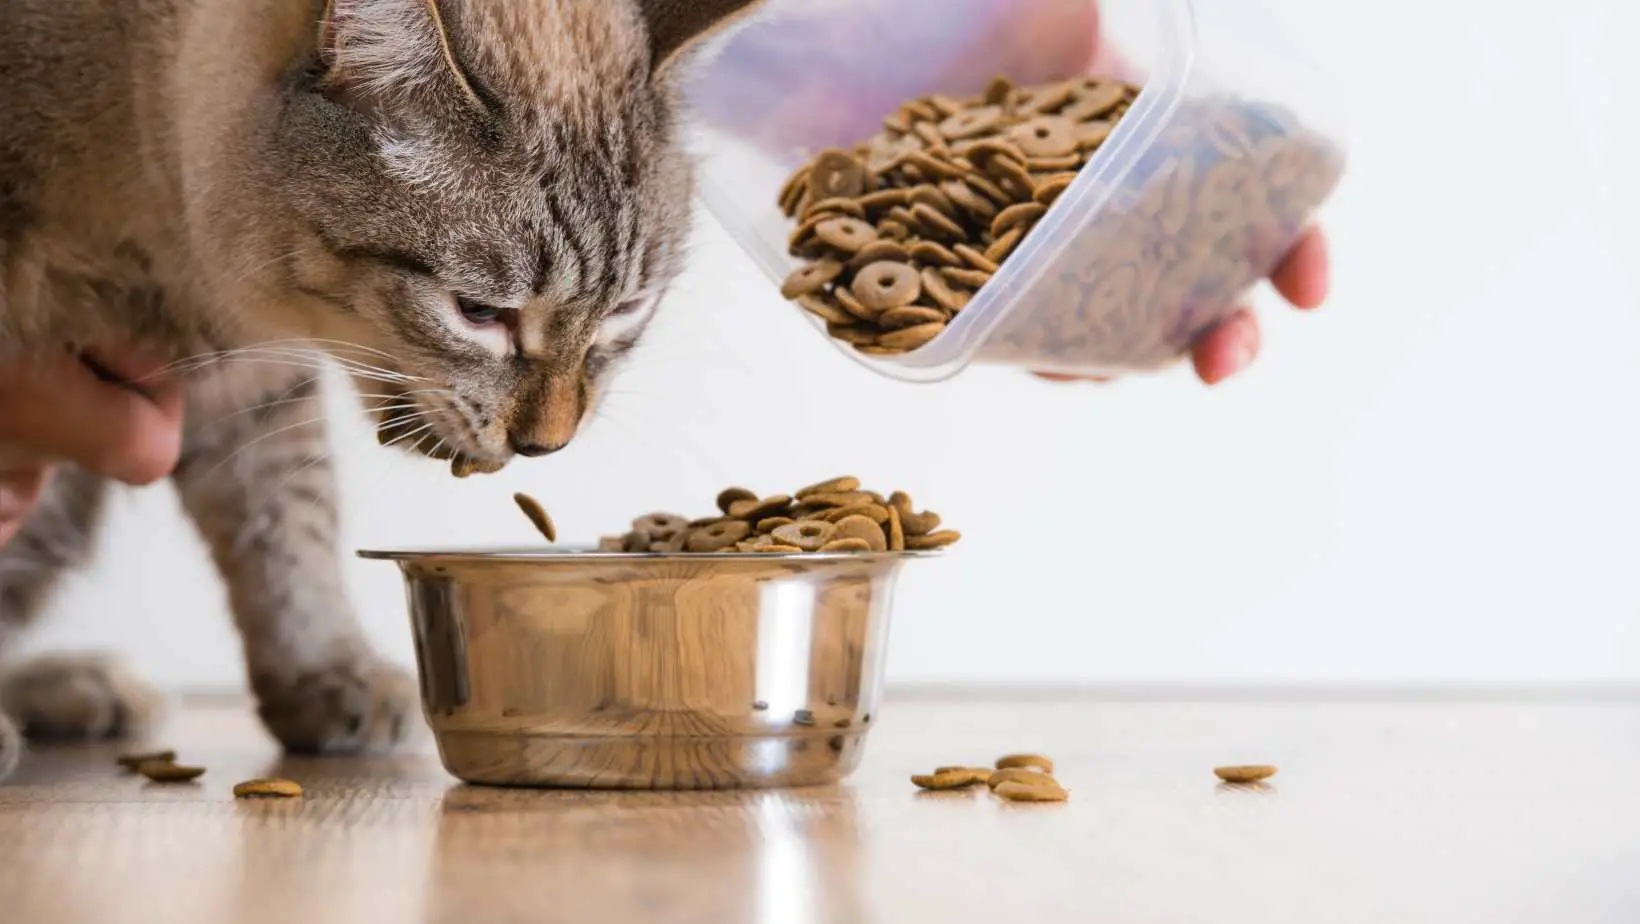 Find Out the Truth and Buy the Best Cat Food For Kitty and For You